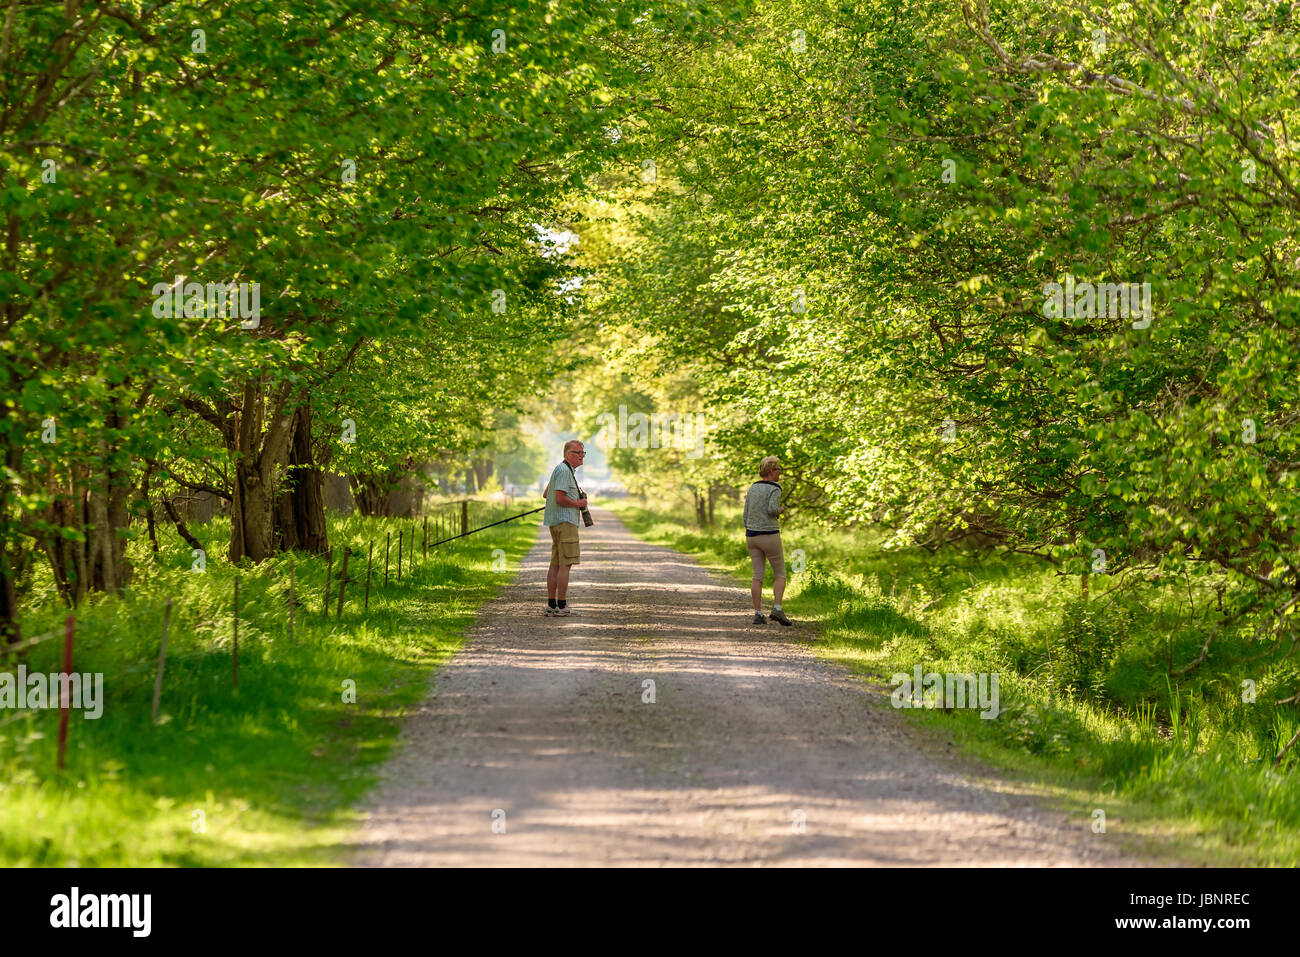 Ottenby, Sweden - May 27, 2017: Environmental documentary. Senior couple walking and birdwatching on straight narrow country road. Trees forming a tun Stock Photo